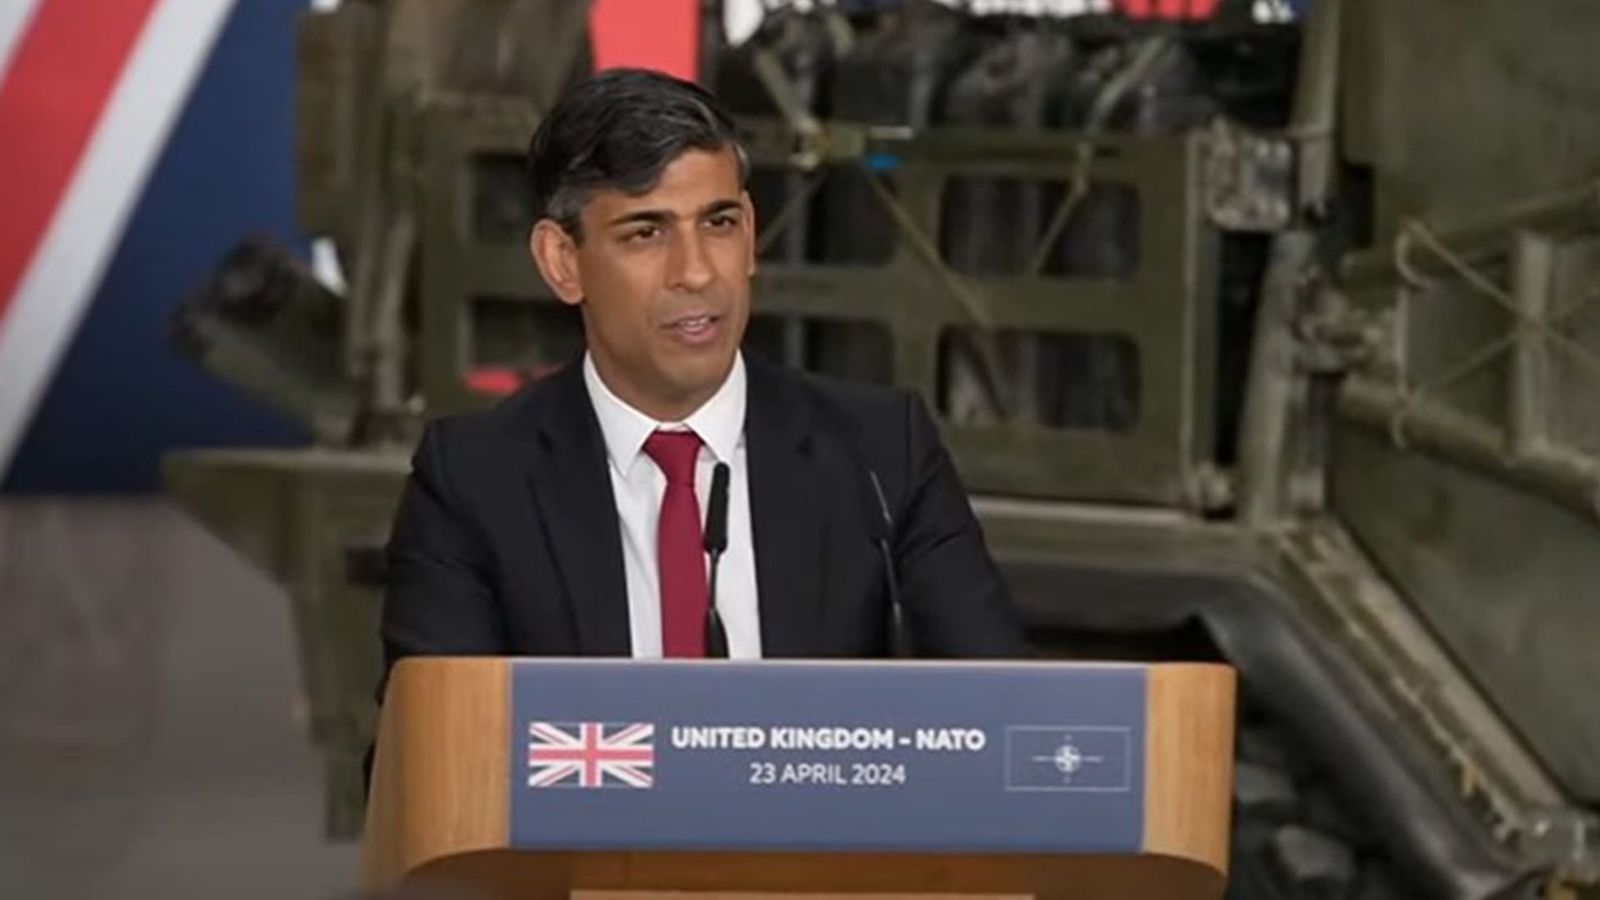 Rishi Sunak warns of 'growing threats' as he announces tens of billions of pounds in extra defence funding